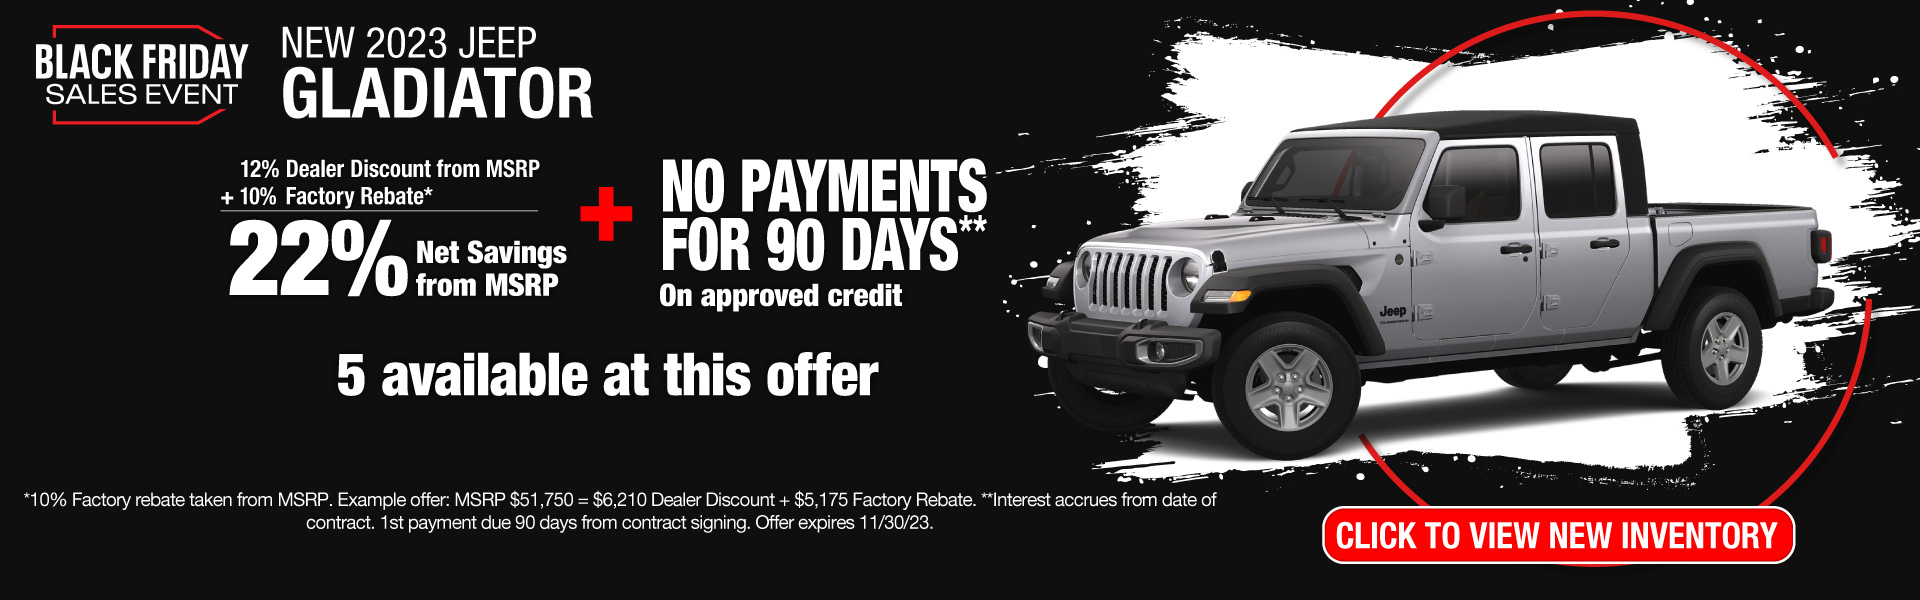 Get a New 2023 Jeep Gladiator for 22% Net Savings from MSRP PLUS No Payments for 90 Days! Offer expires 11/30/23.